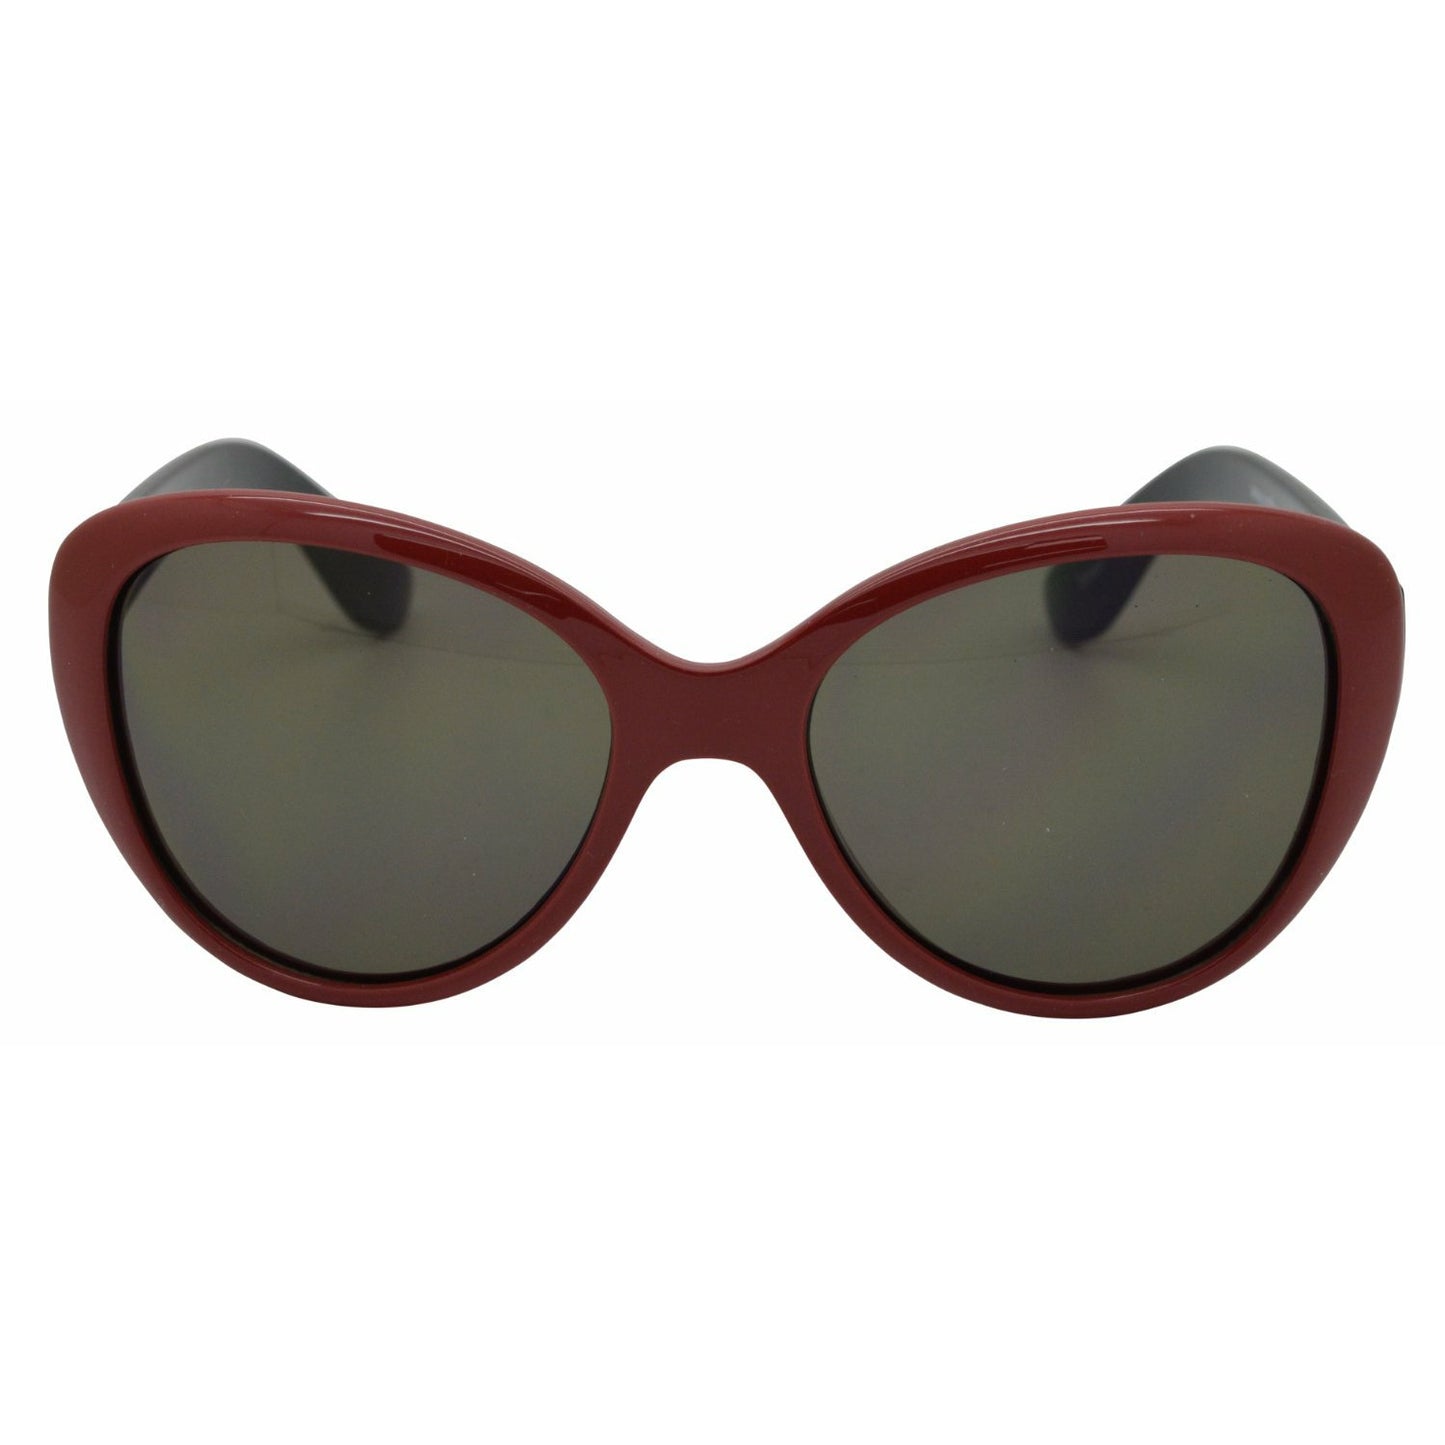 On The Nose Kids Sunglasses - Rosie Red